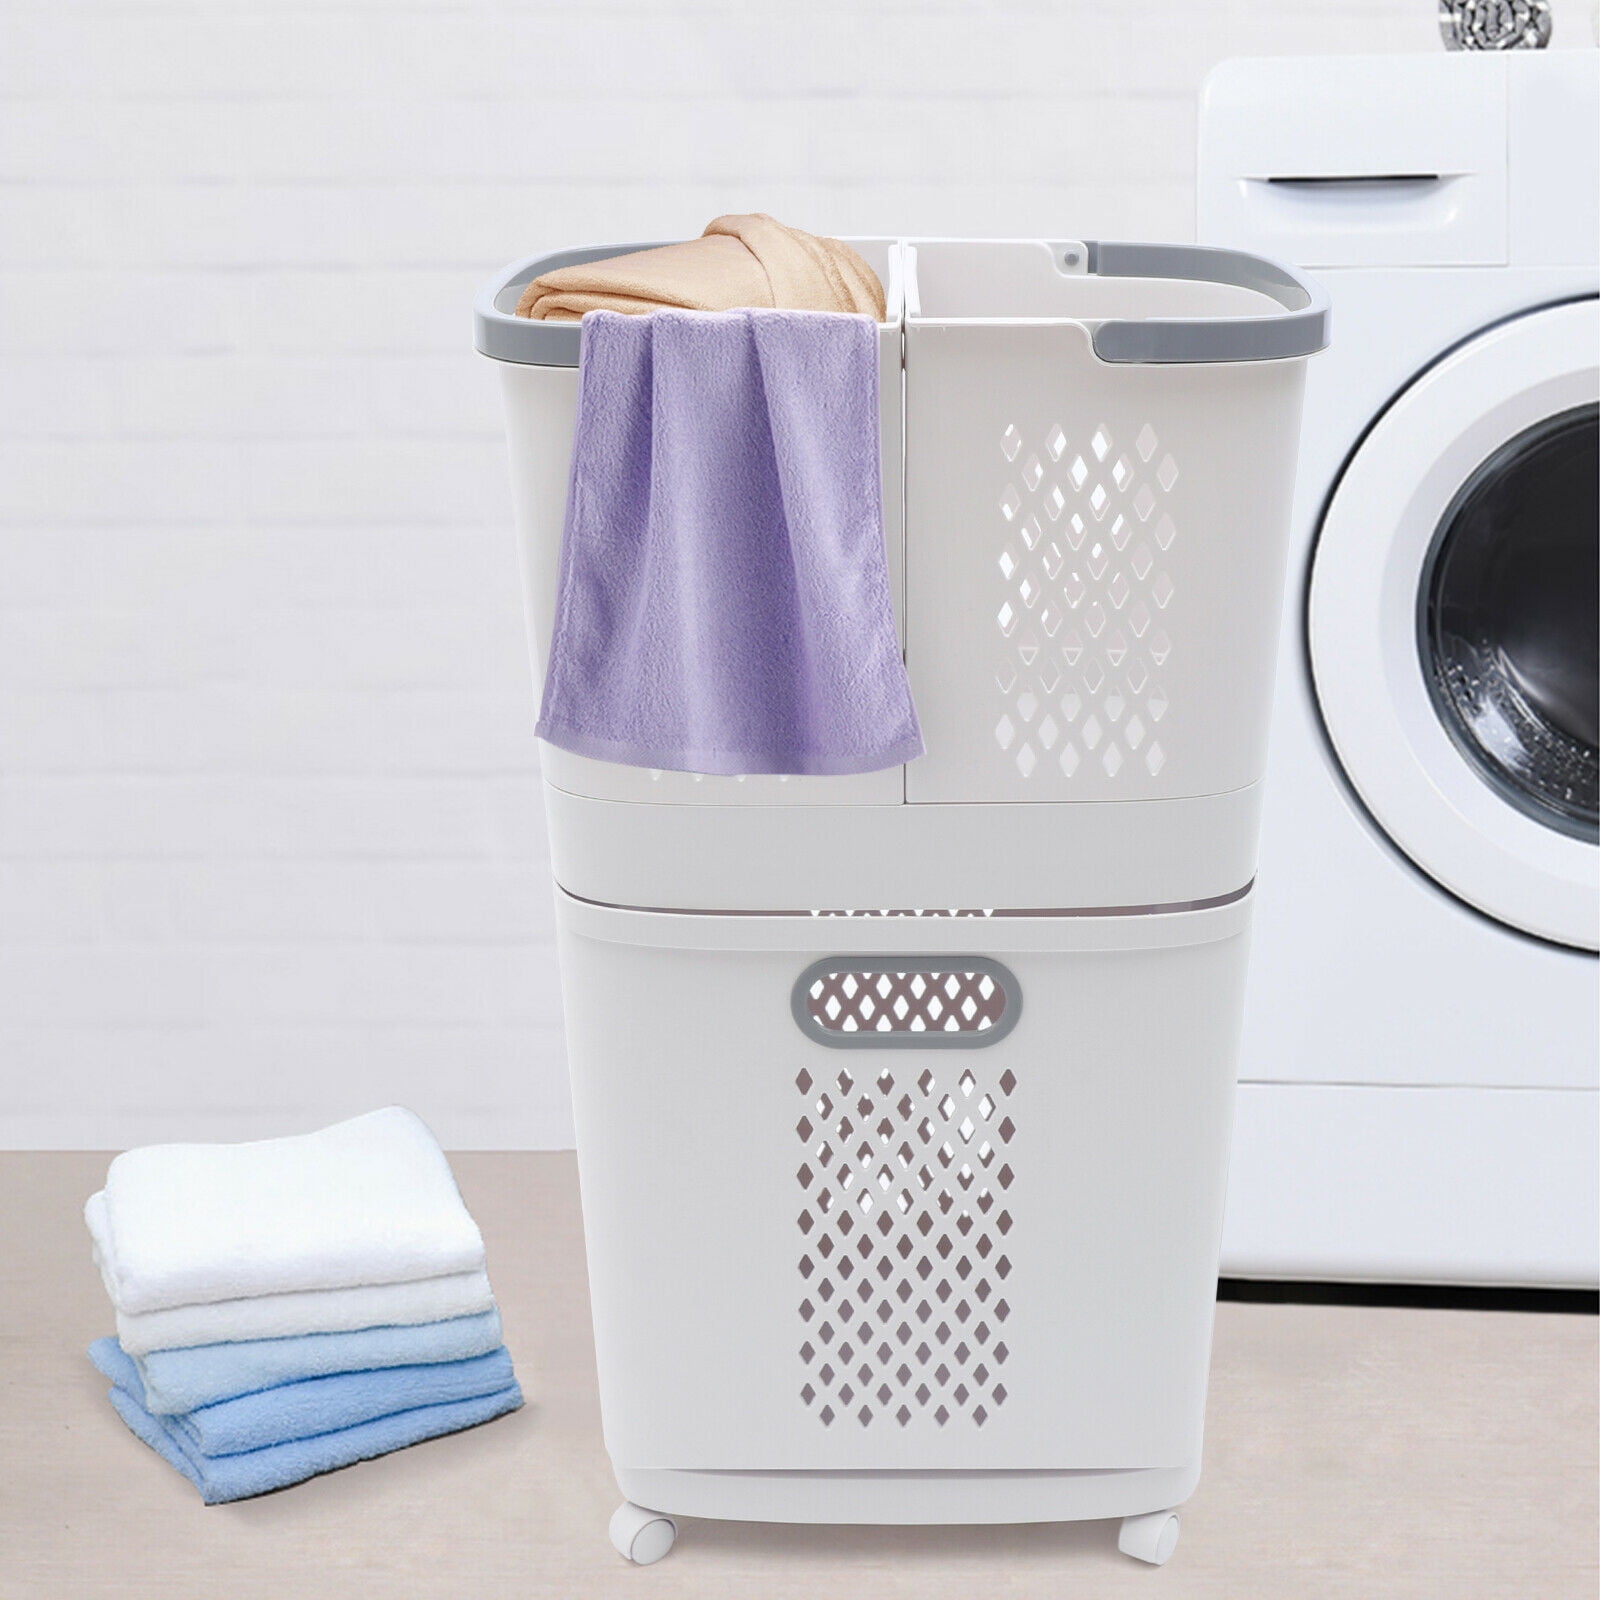 Wuzstar Stackable Rolling Laundry Basket with Wheels